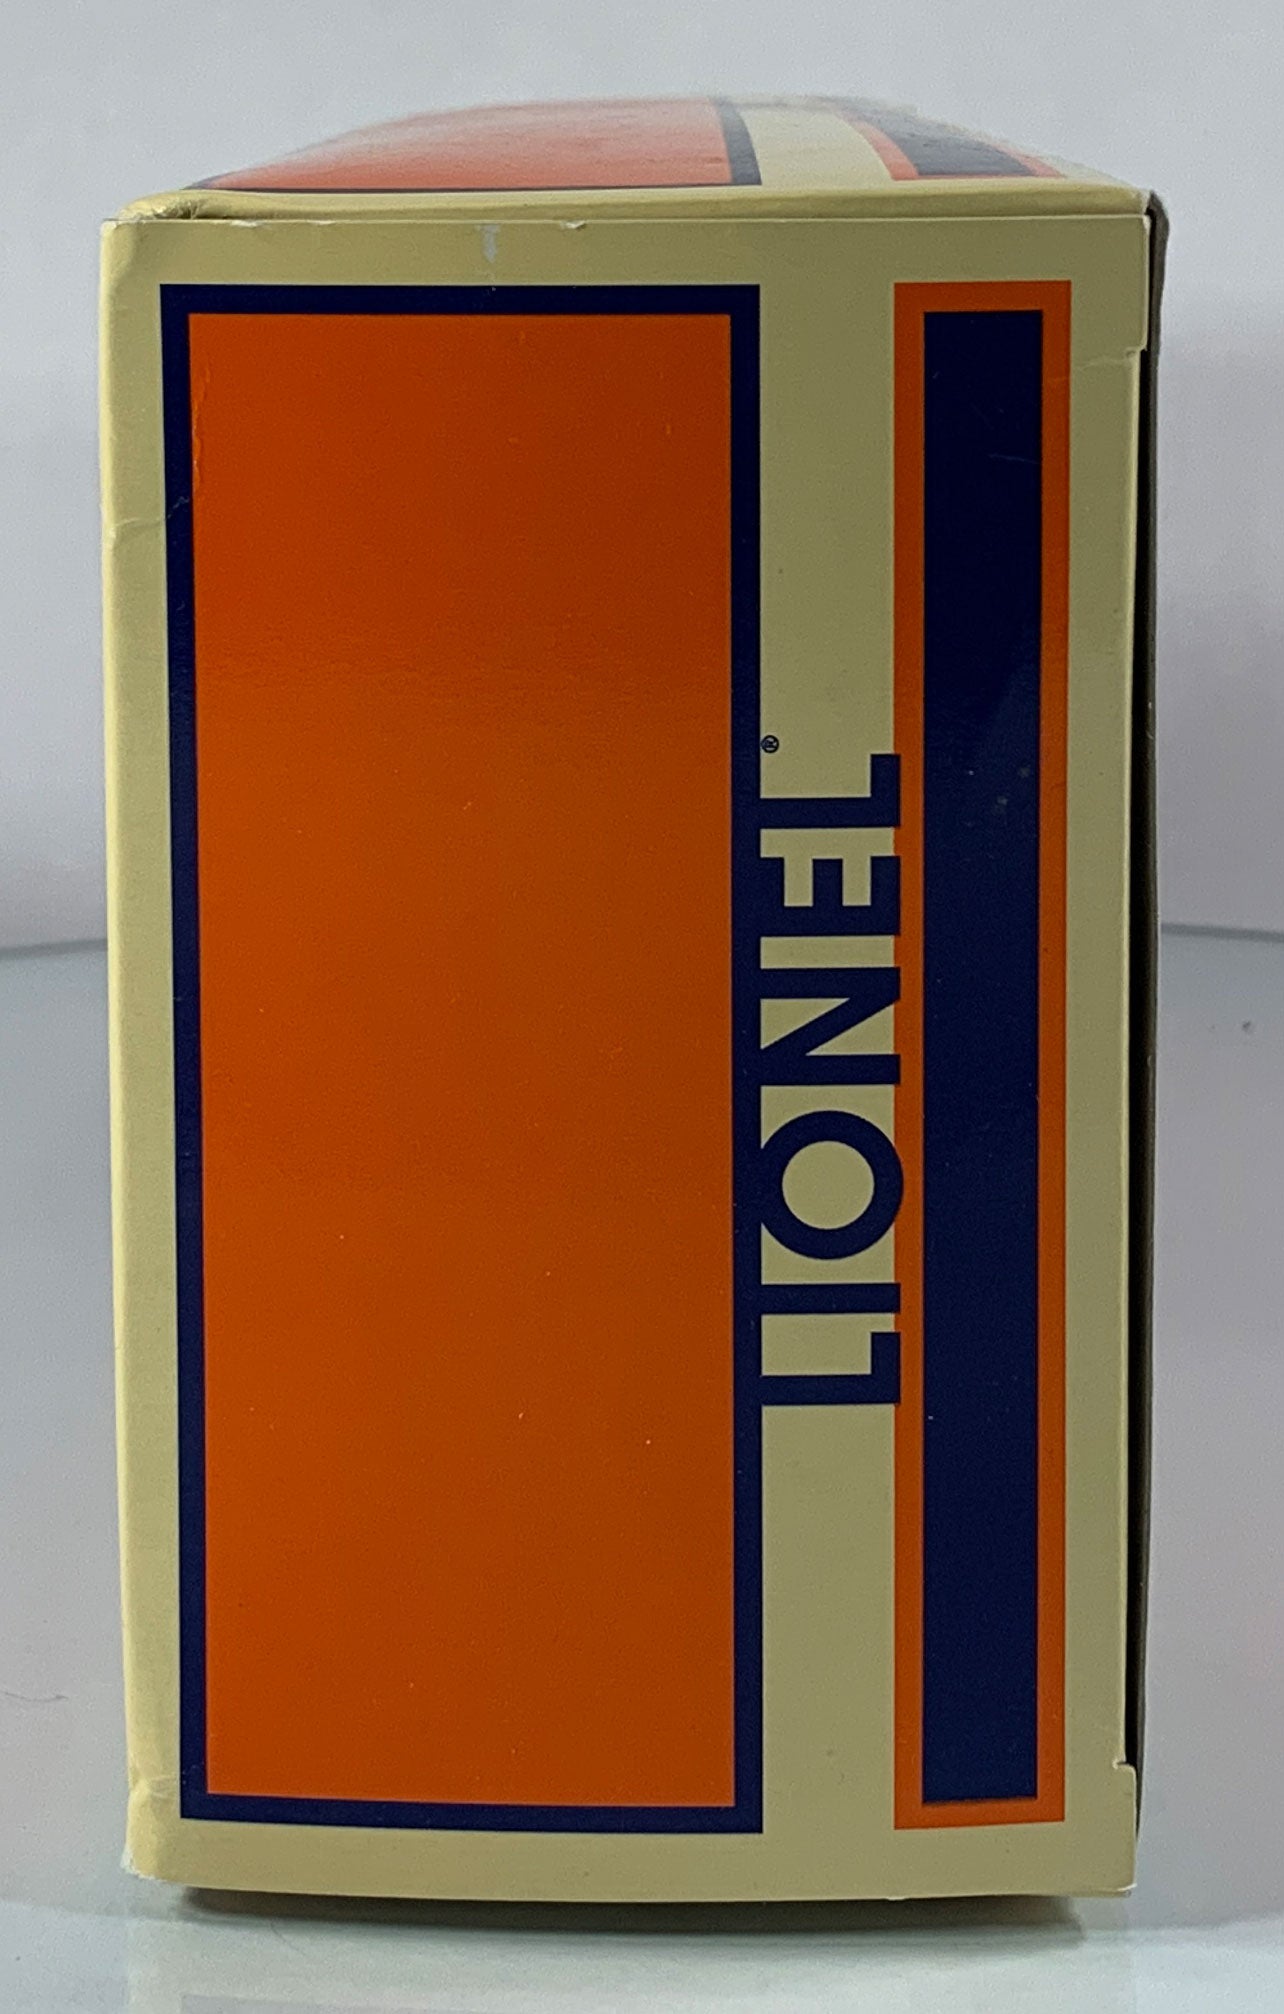 LIONEL • O GAUGE • 2001 Shell Oil Single Dome Tank Car 6-19627 • NEW OLD STOCK